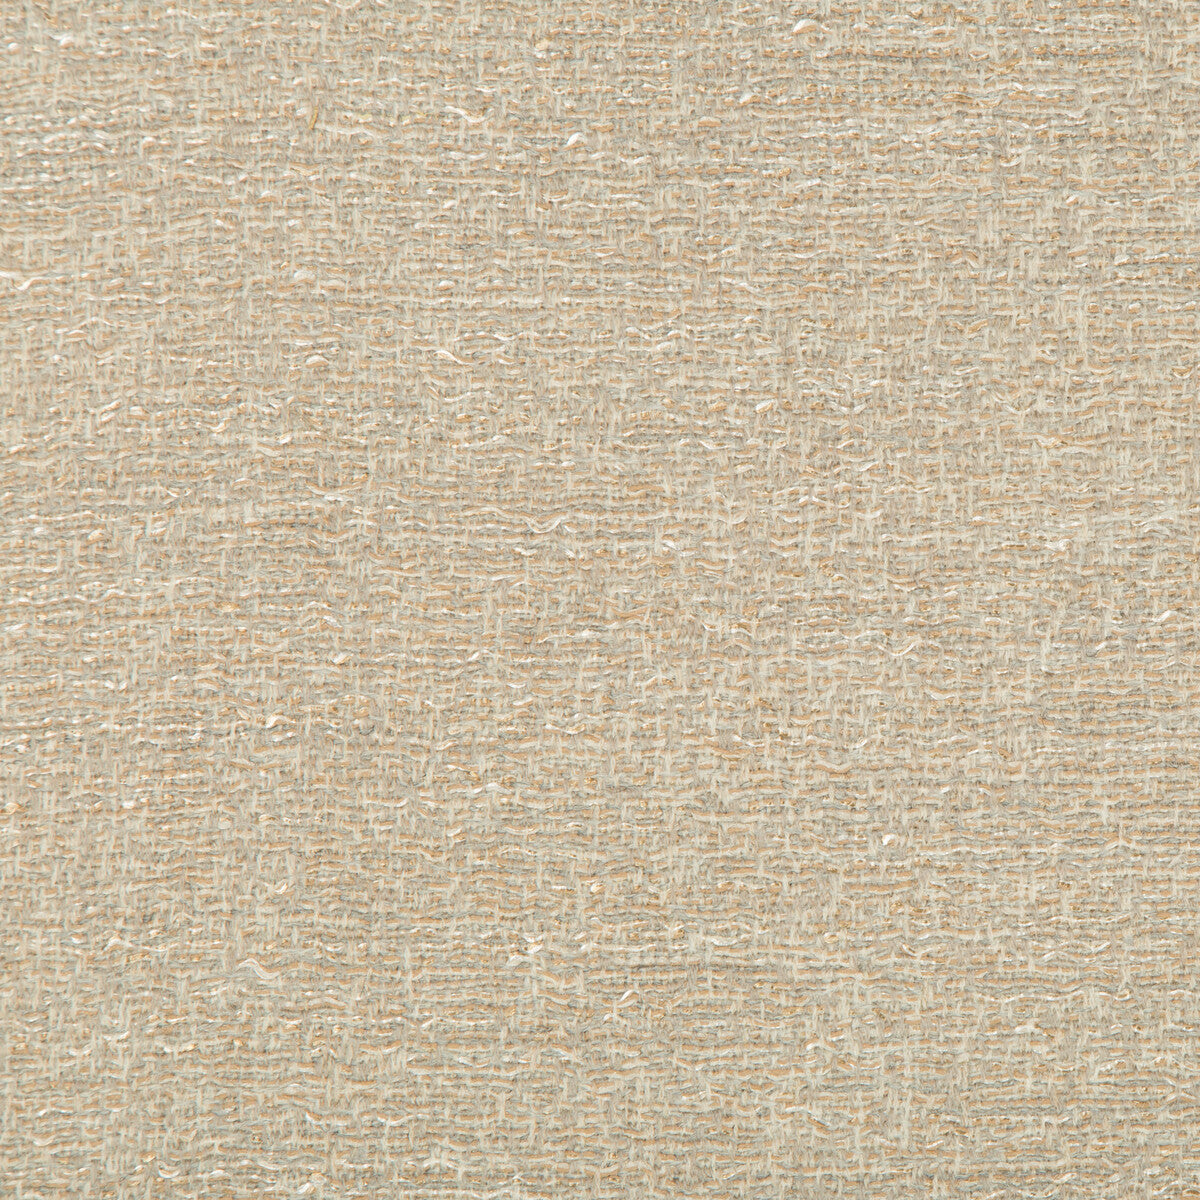 Balmy fabric in quartz color - pattern 4468.16.0 - by Kravet Couture in the Sue Firestone Malibu collection